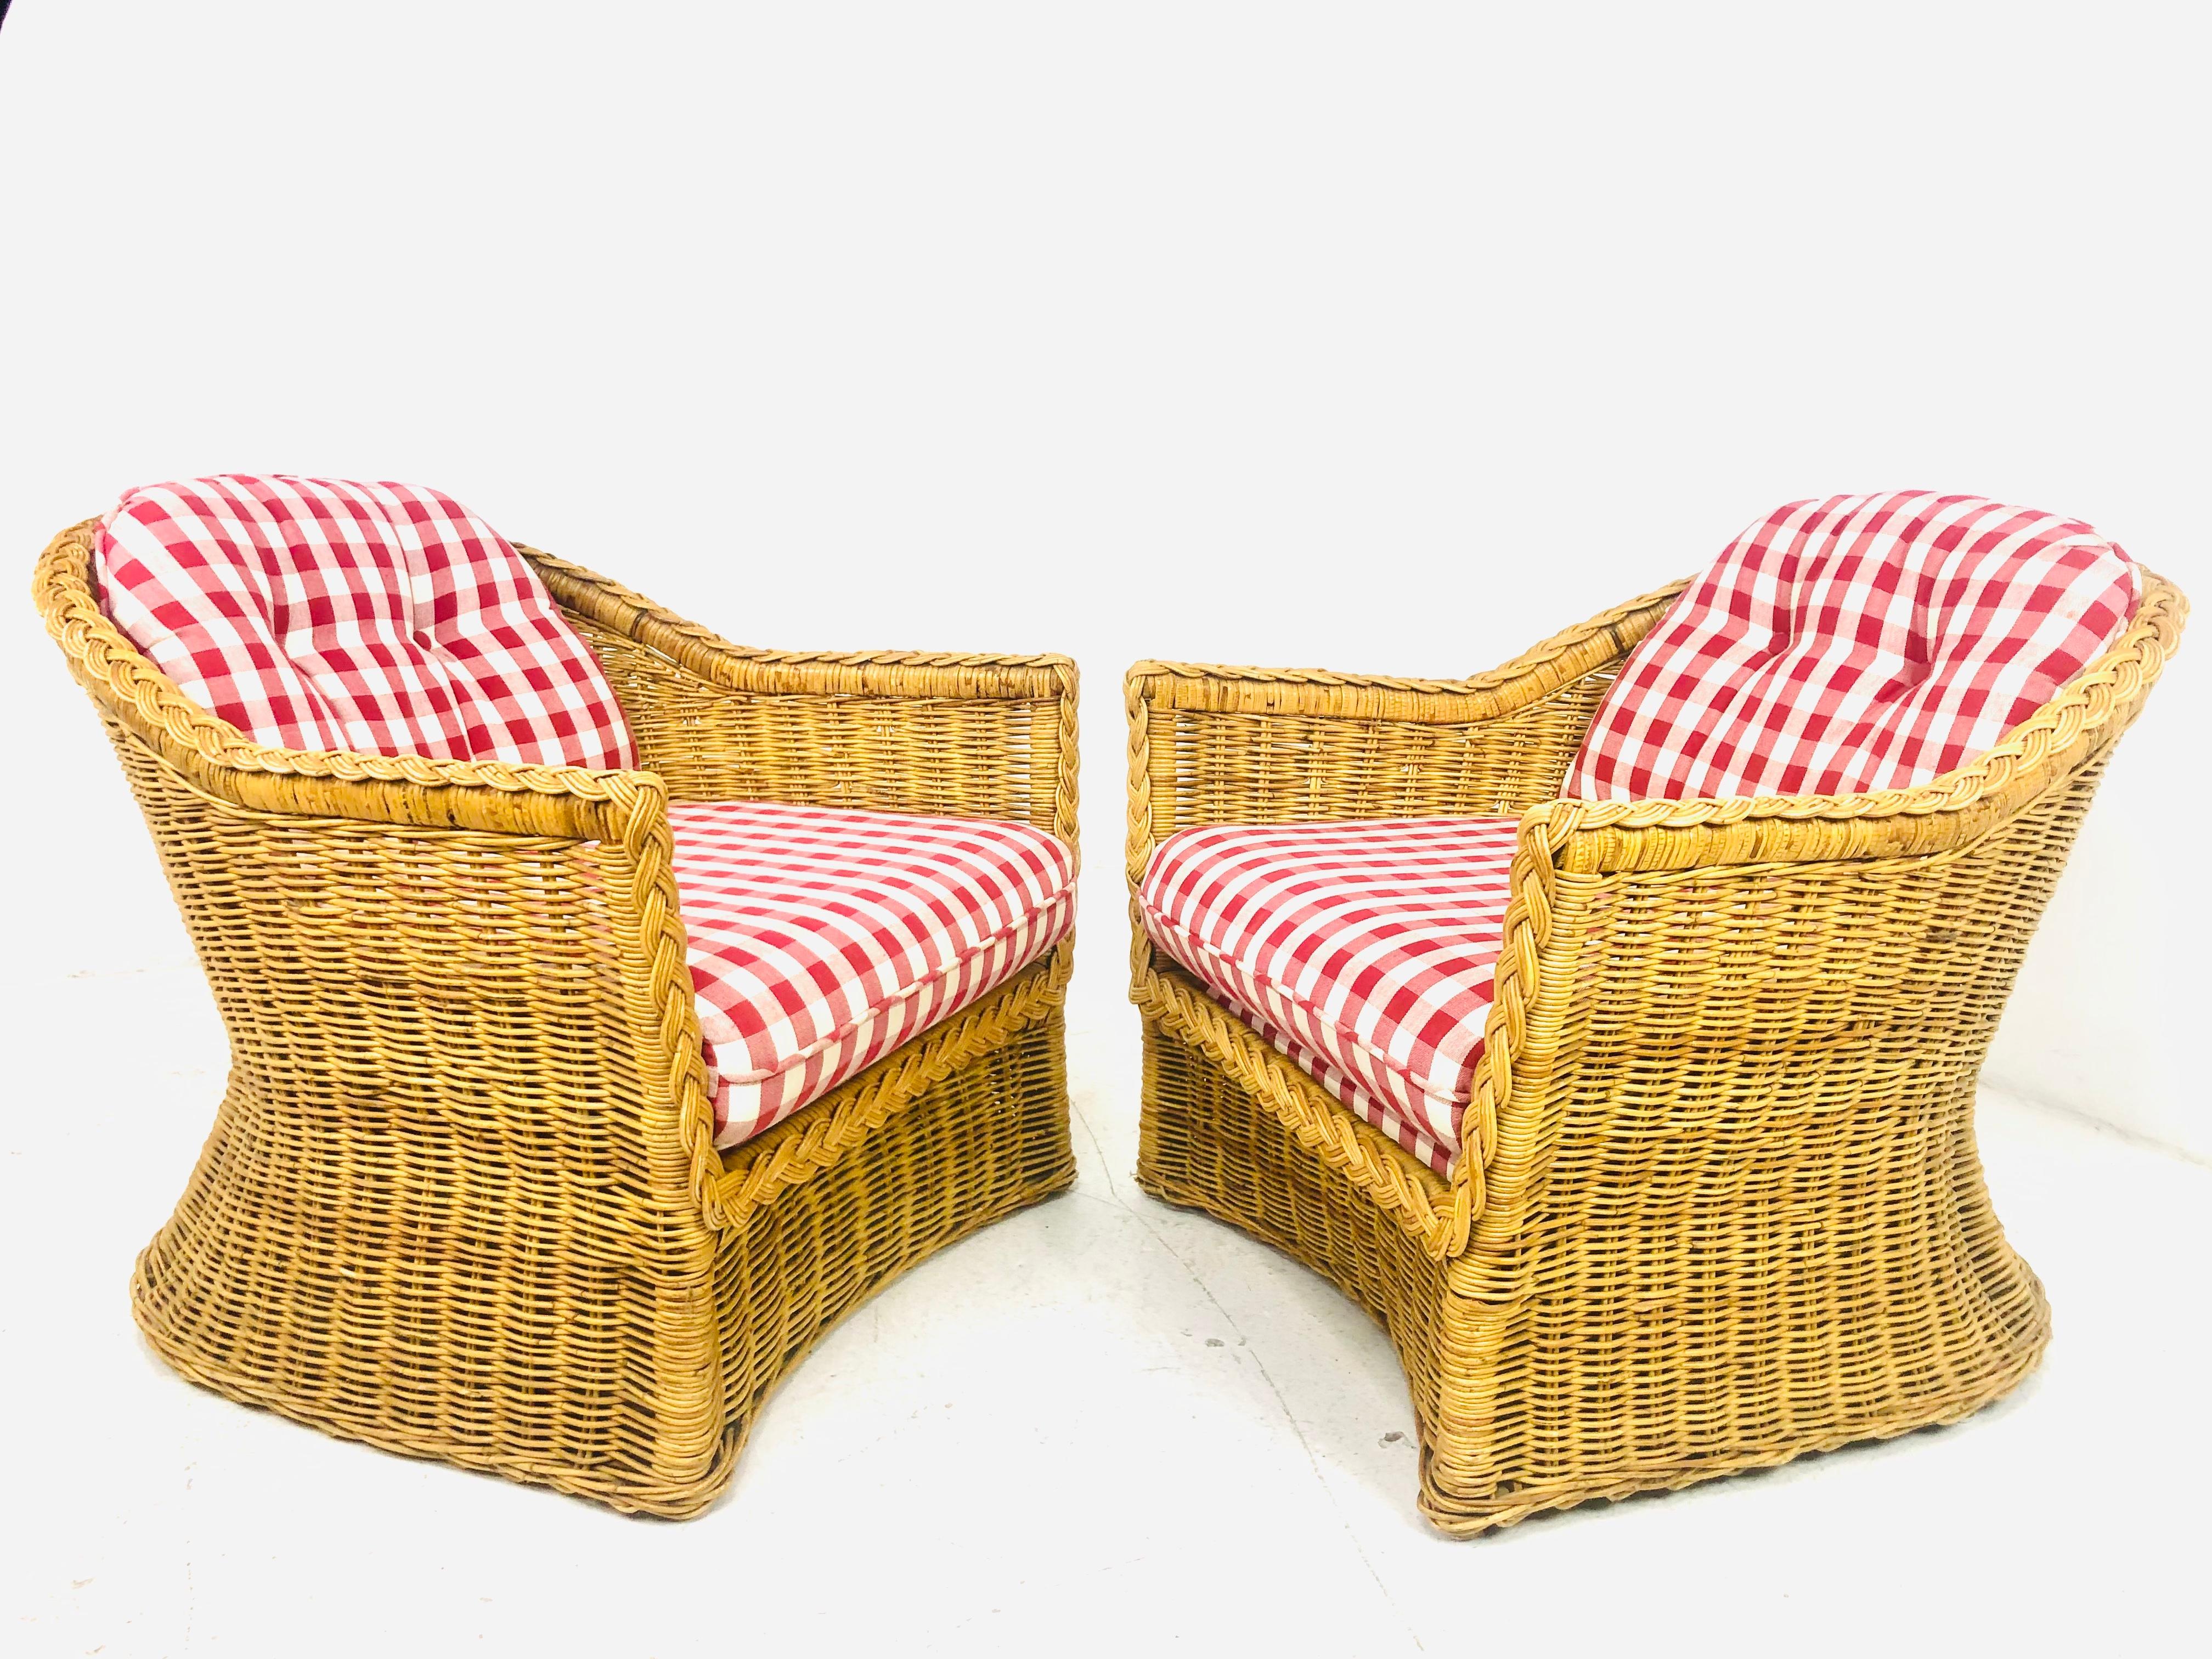 Organic Modern Pair of Braided Rattan Chairs by Wicker Works